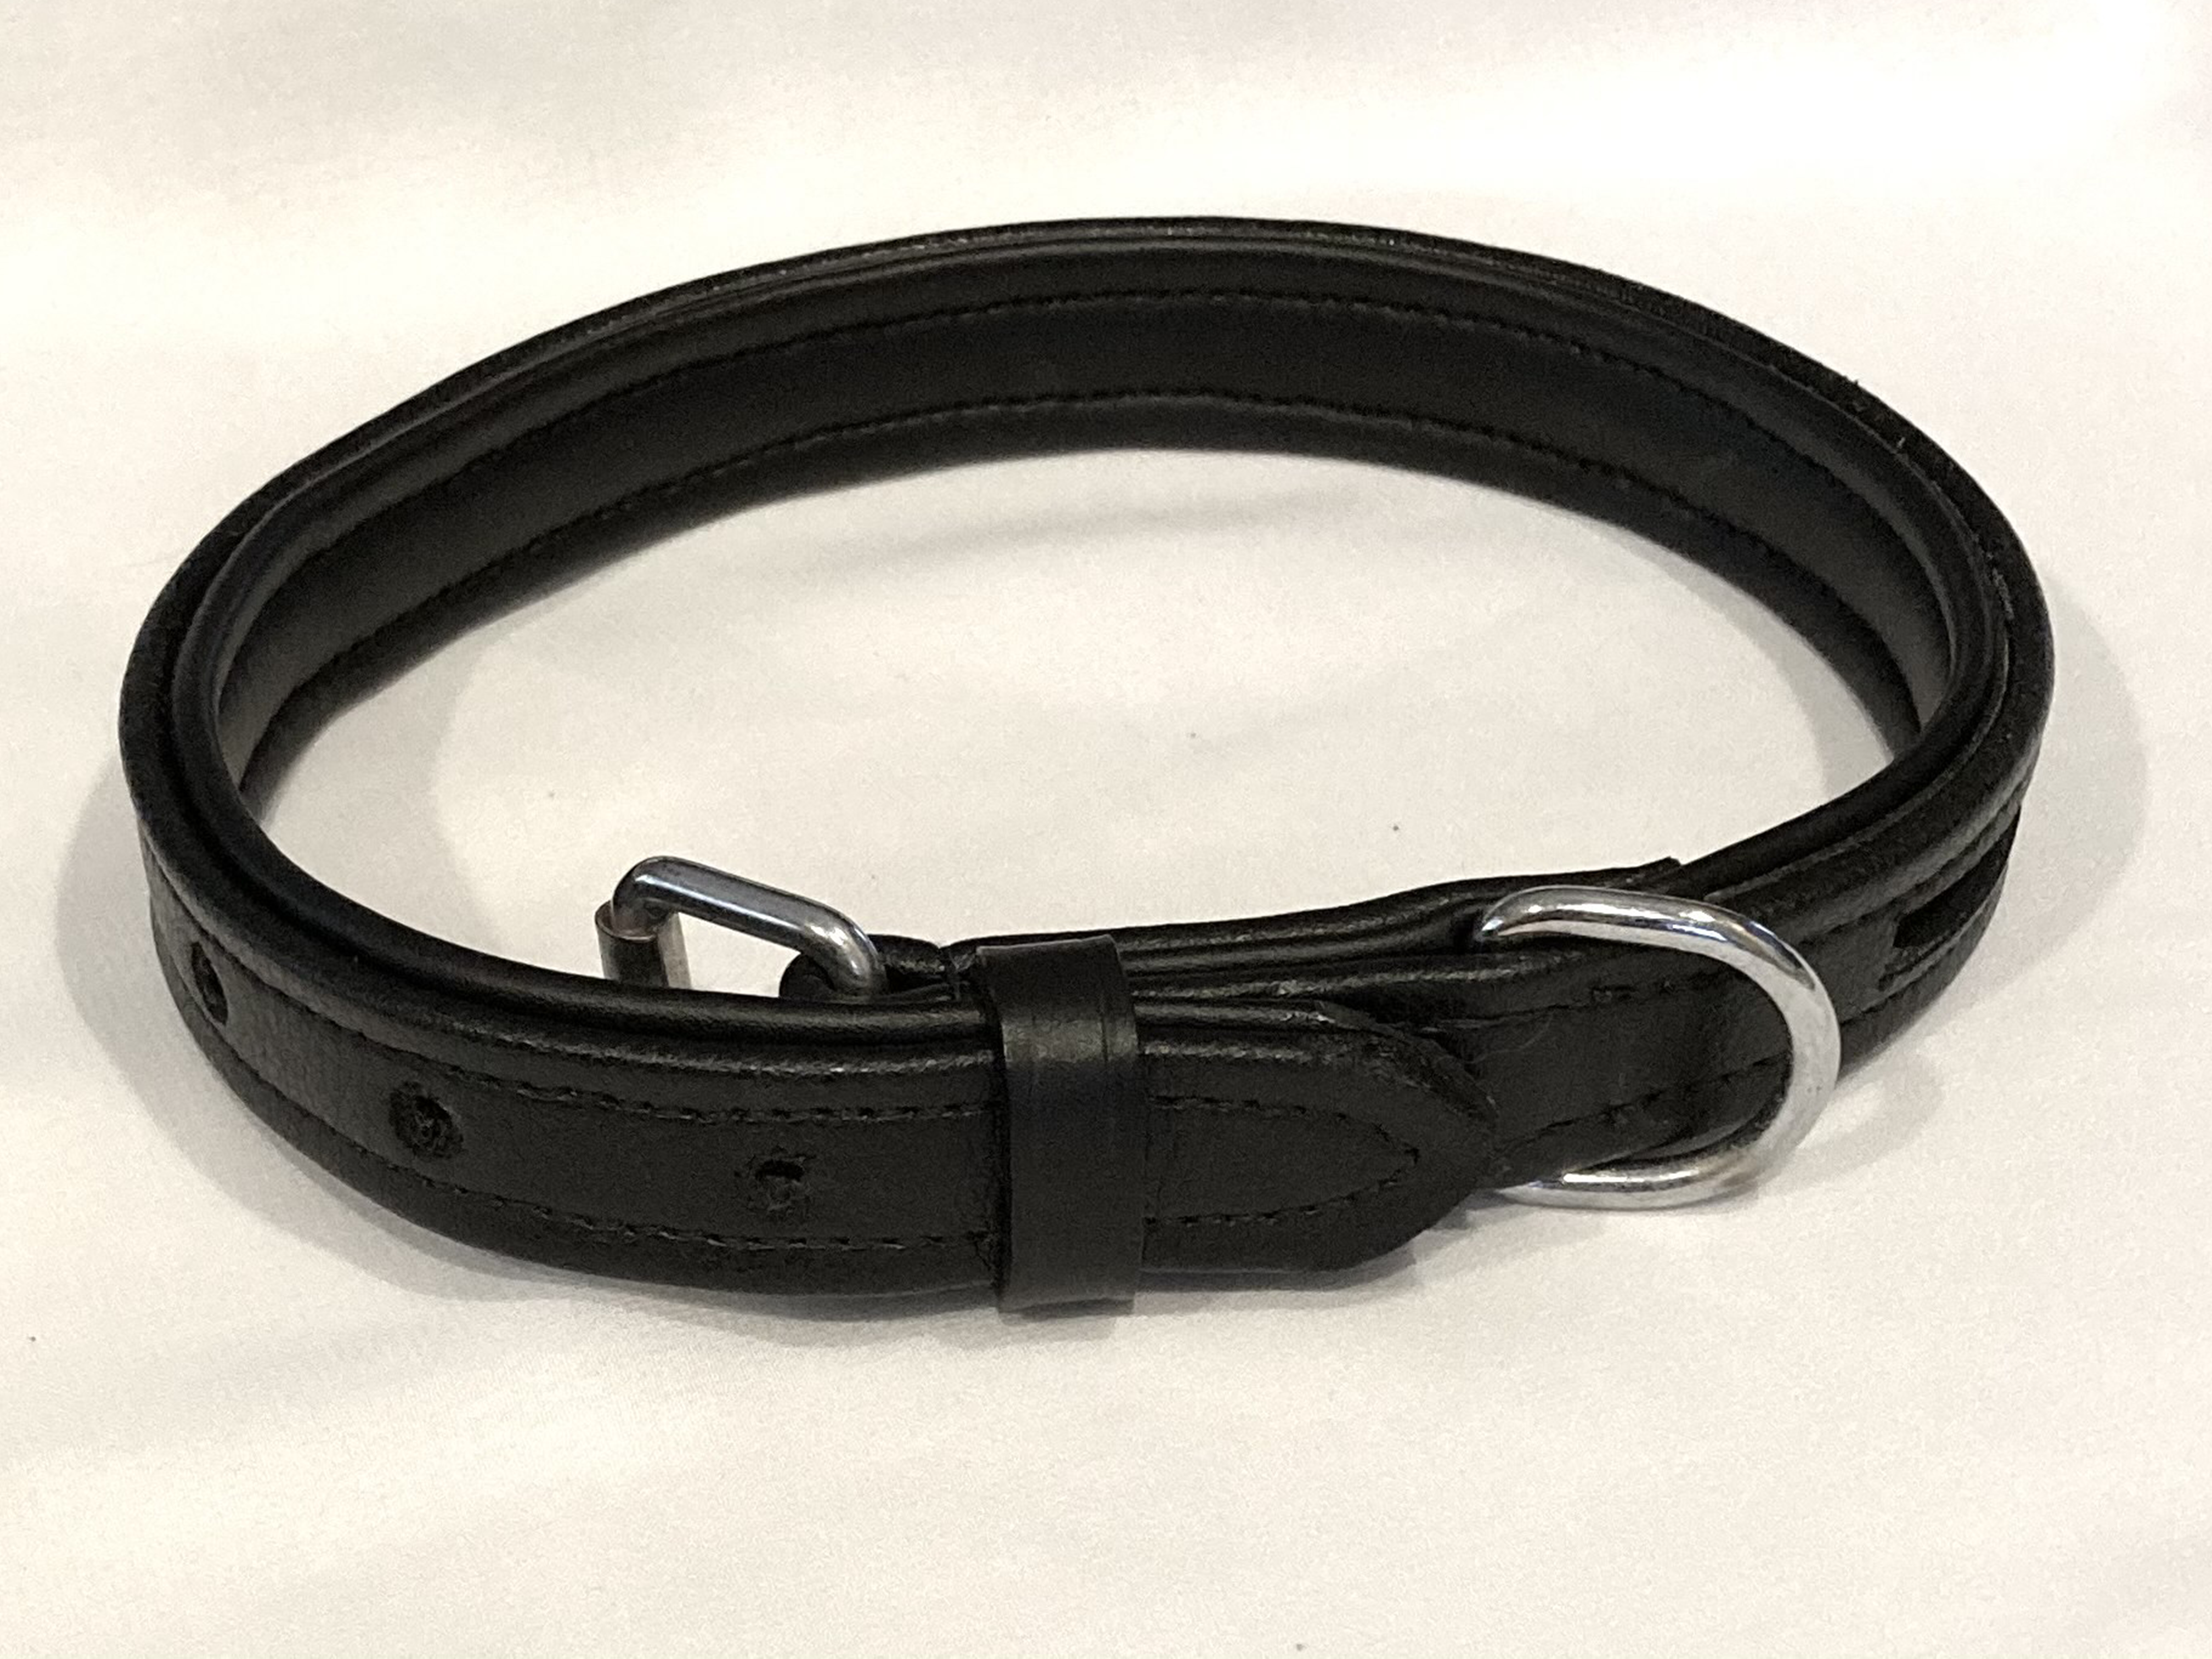 empty channel leather dog collar